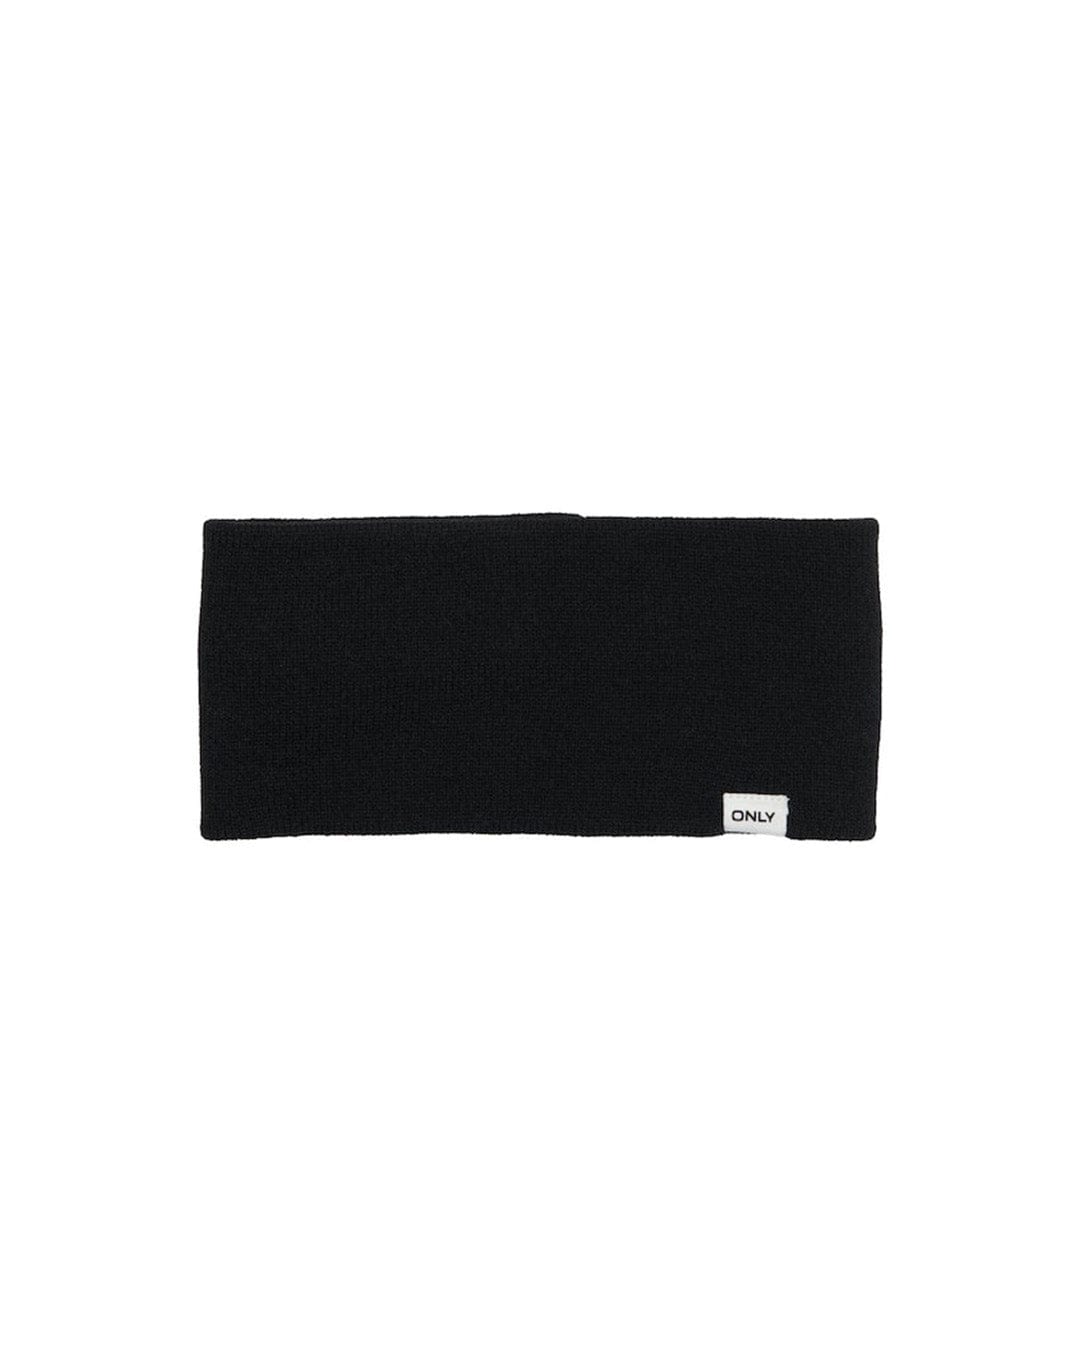 Only Beanies One Size Only Madison Black Headband